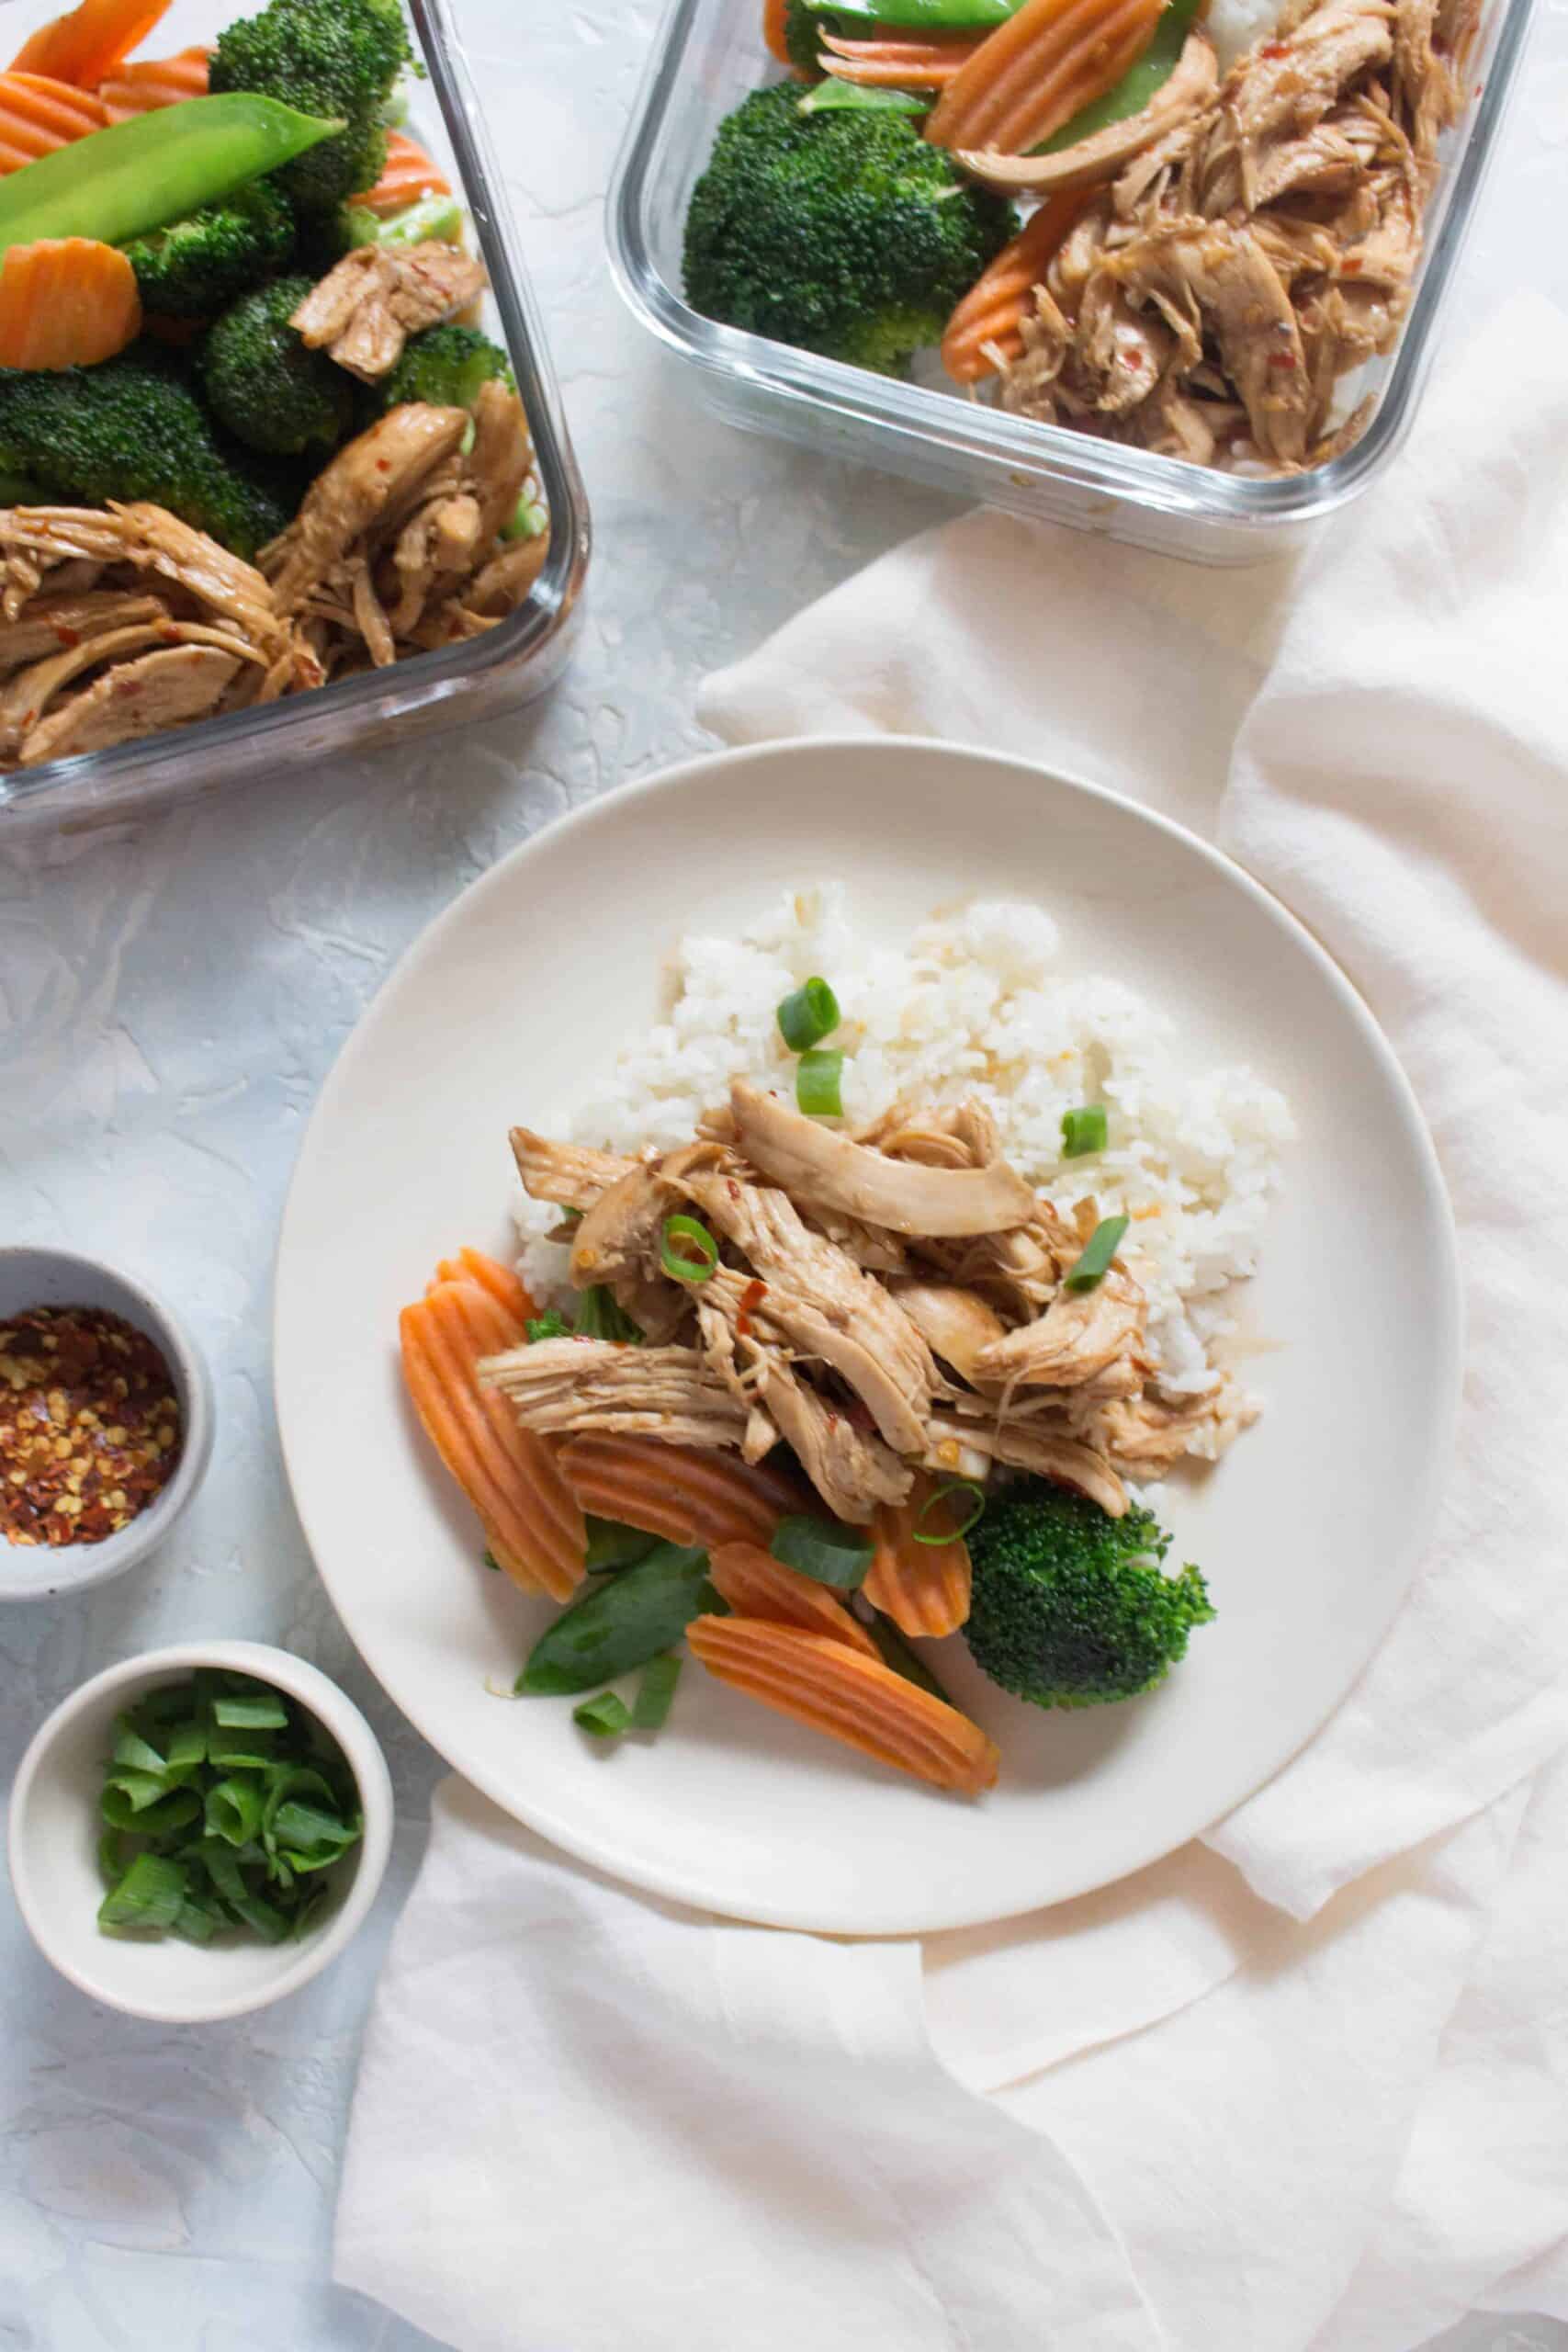 This Instant Pot Teriyaki Chicken is full of bold flavours that will quickly become a weeknight family favourite and is makes the perfect speedy meal prep.